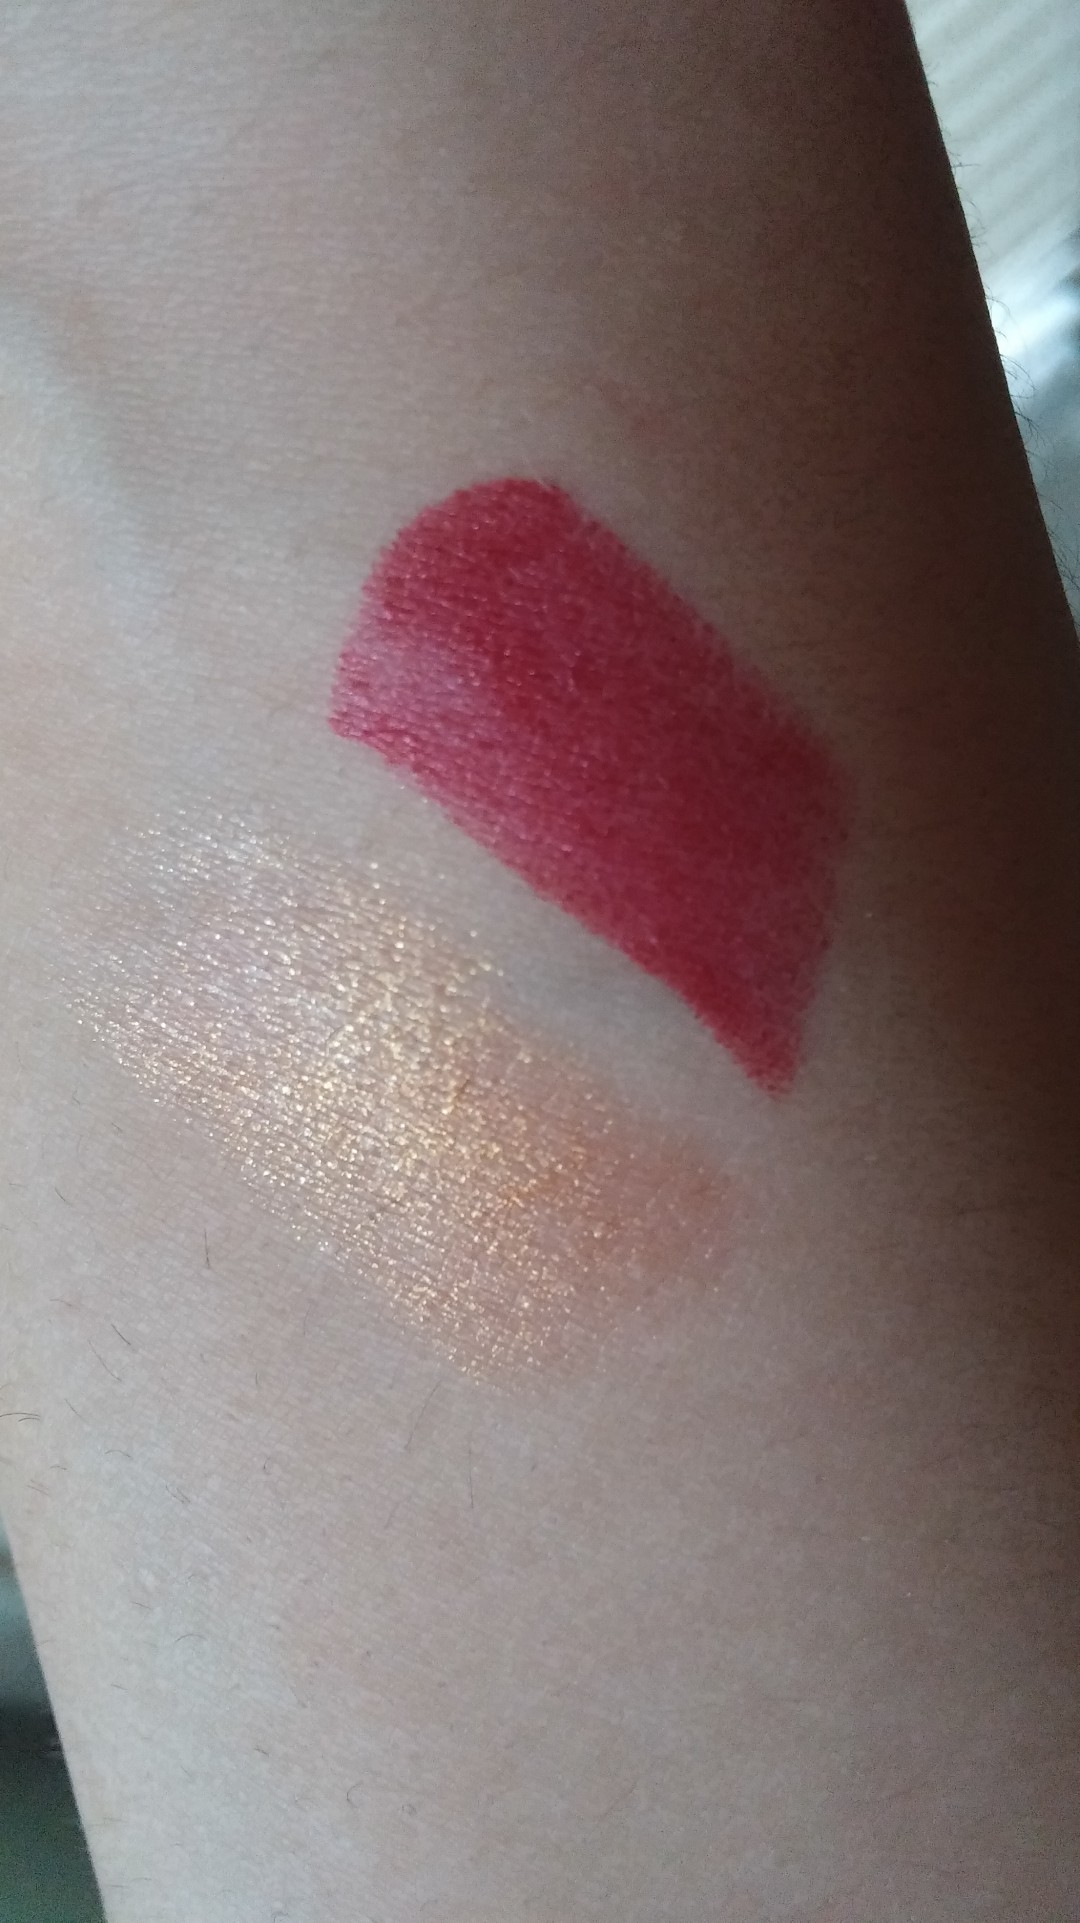 We are swatches of lipsticks. The gold one is droid (Gold 40) or Droid (I think) the red one is Red 30 I have no idea what the name for this one is but I'm sticking with NOOOOO!